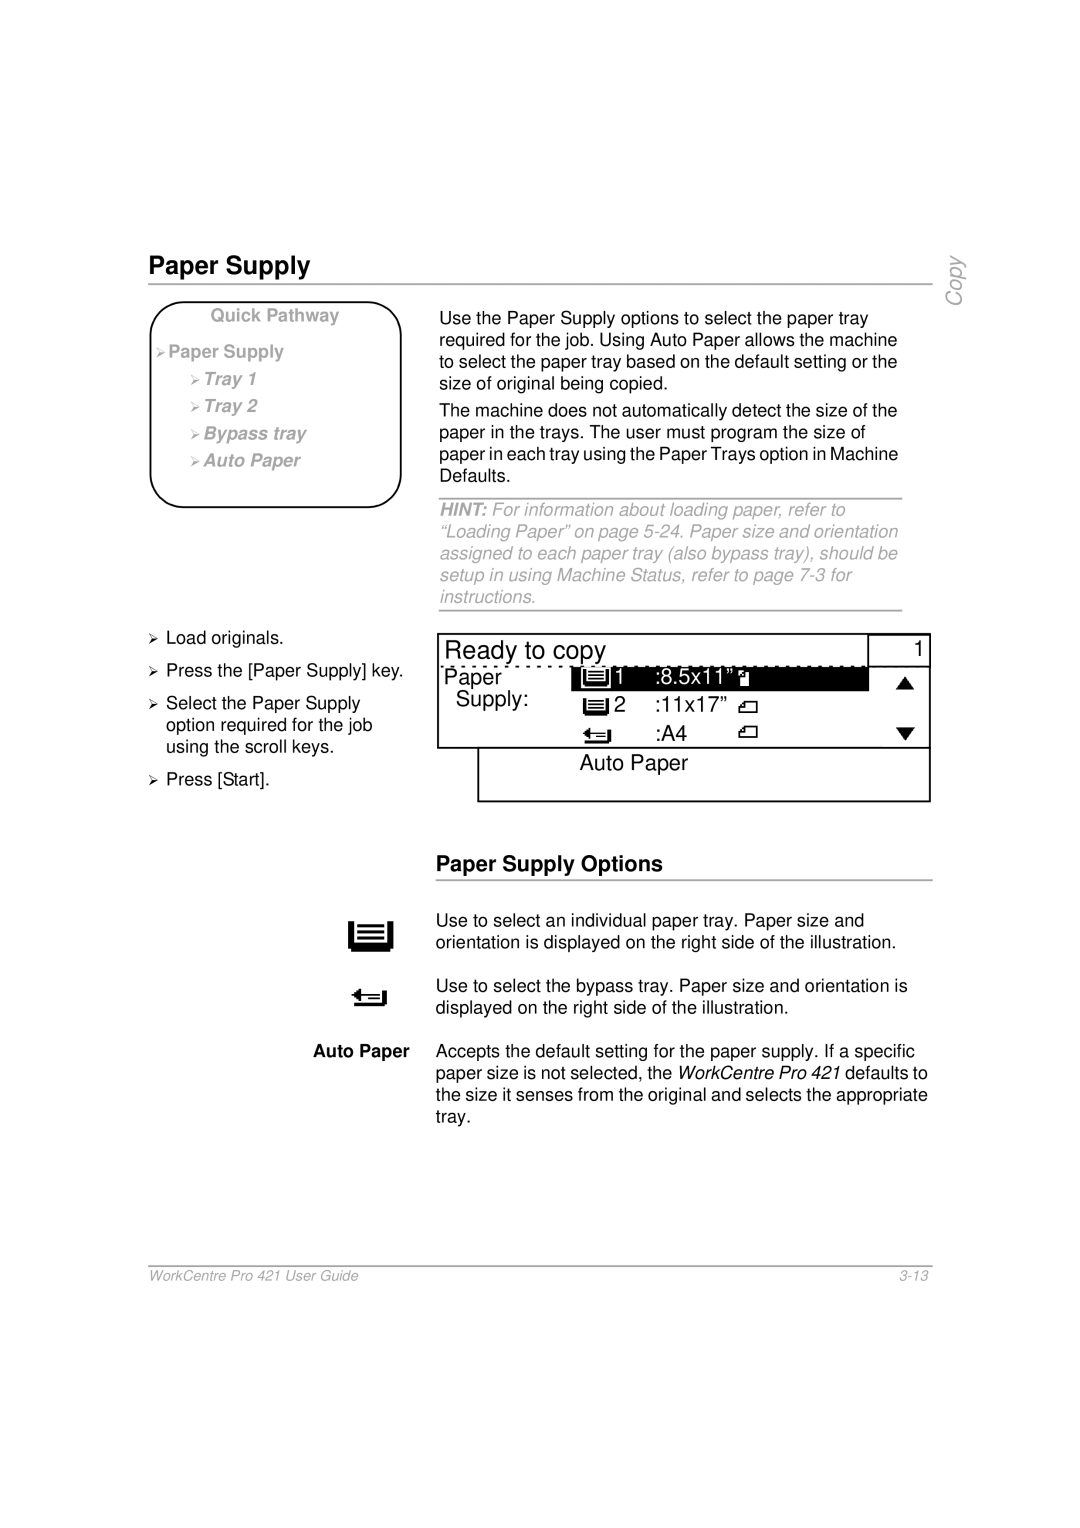 Xerox 421 manual 5x11, Supply 11x17 Auto Paper, Paper Supply Options 